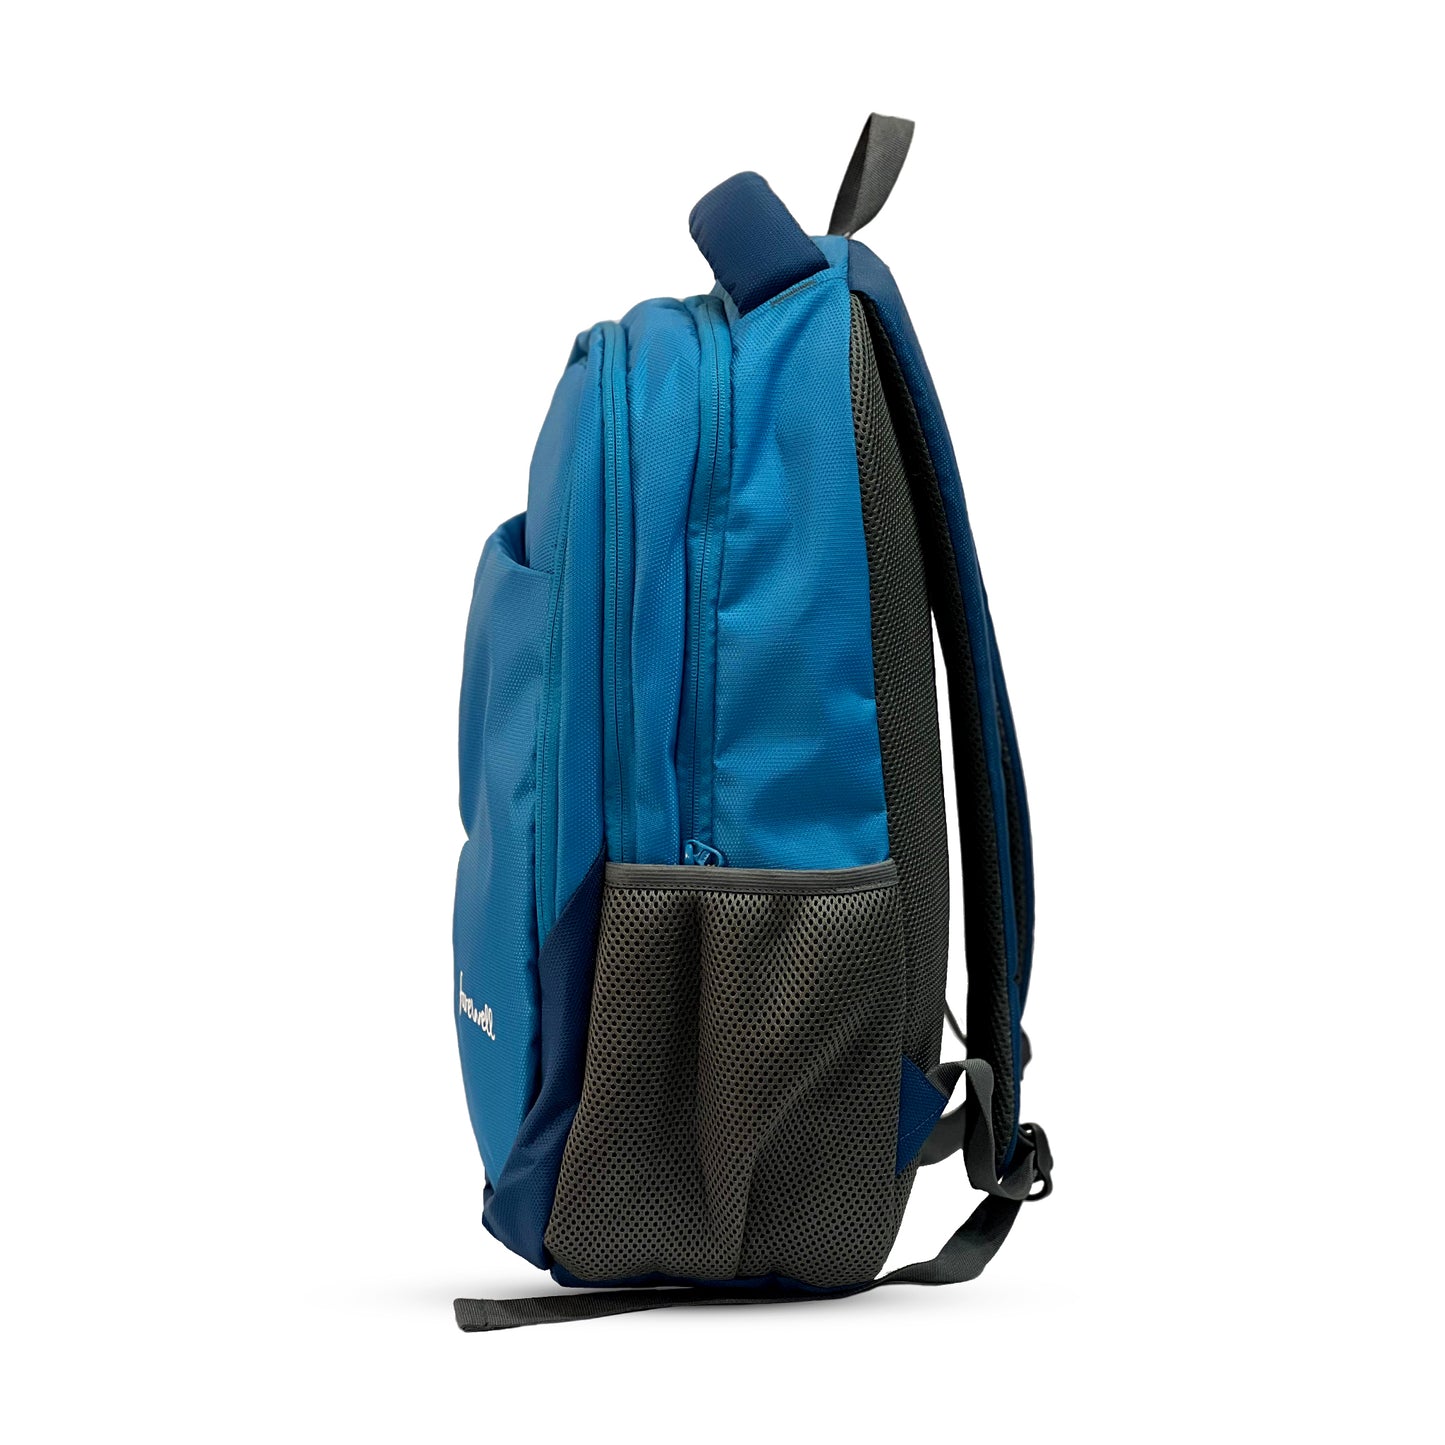 FARE WELL 2A BACKPACK